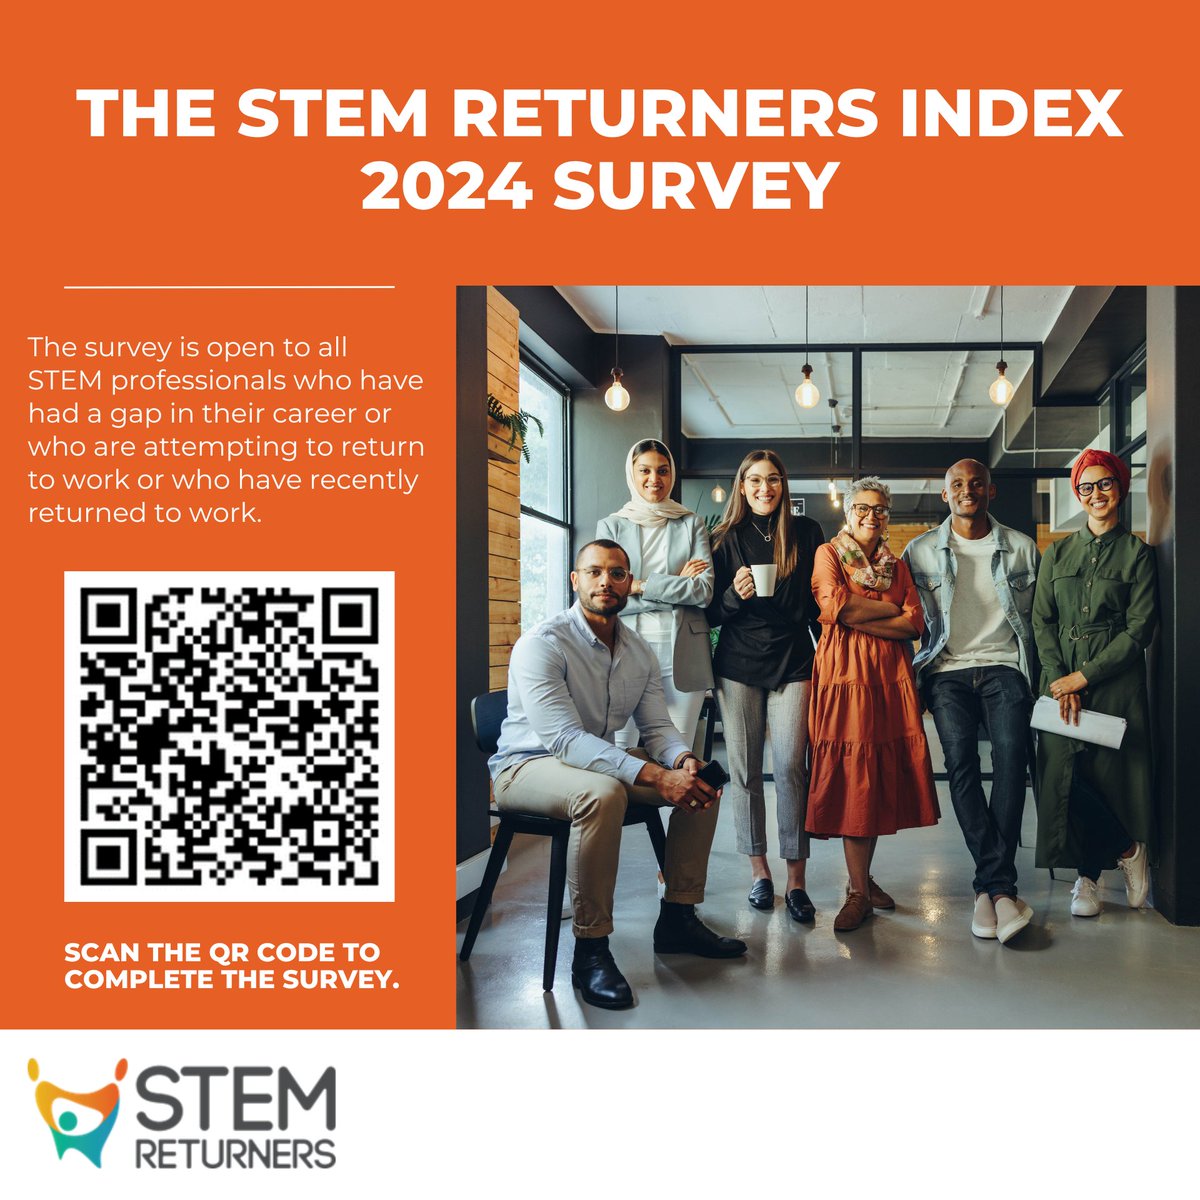 Return-to-work specialists STEM Returners has launched its FIFTH annual survey to understand STEM professionals’ experiences of trying to re-enter the workplace after a career break. Complete the survey before 30 June 2024: ow.ly/N2kZ50RFqxC